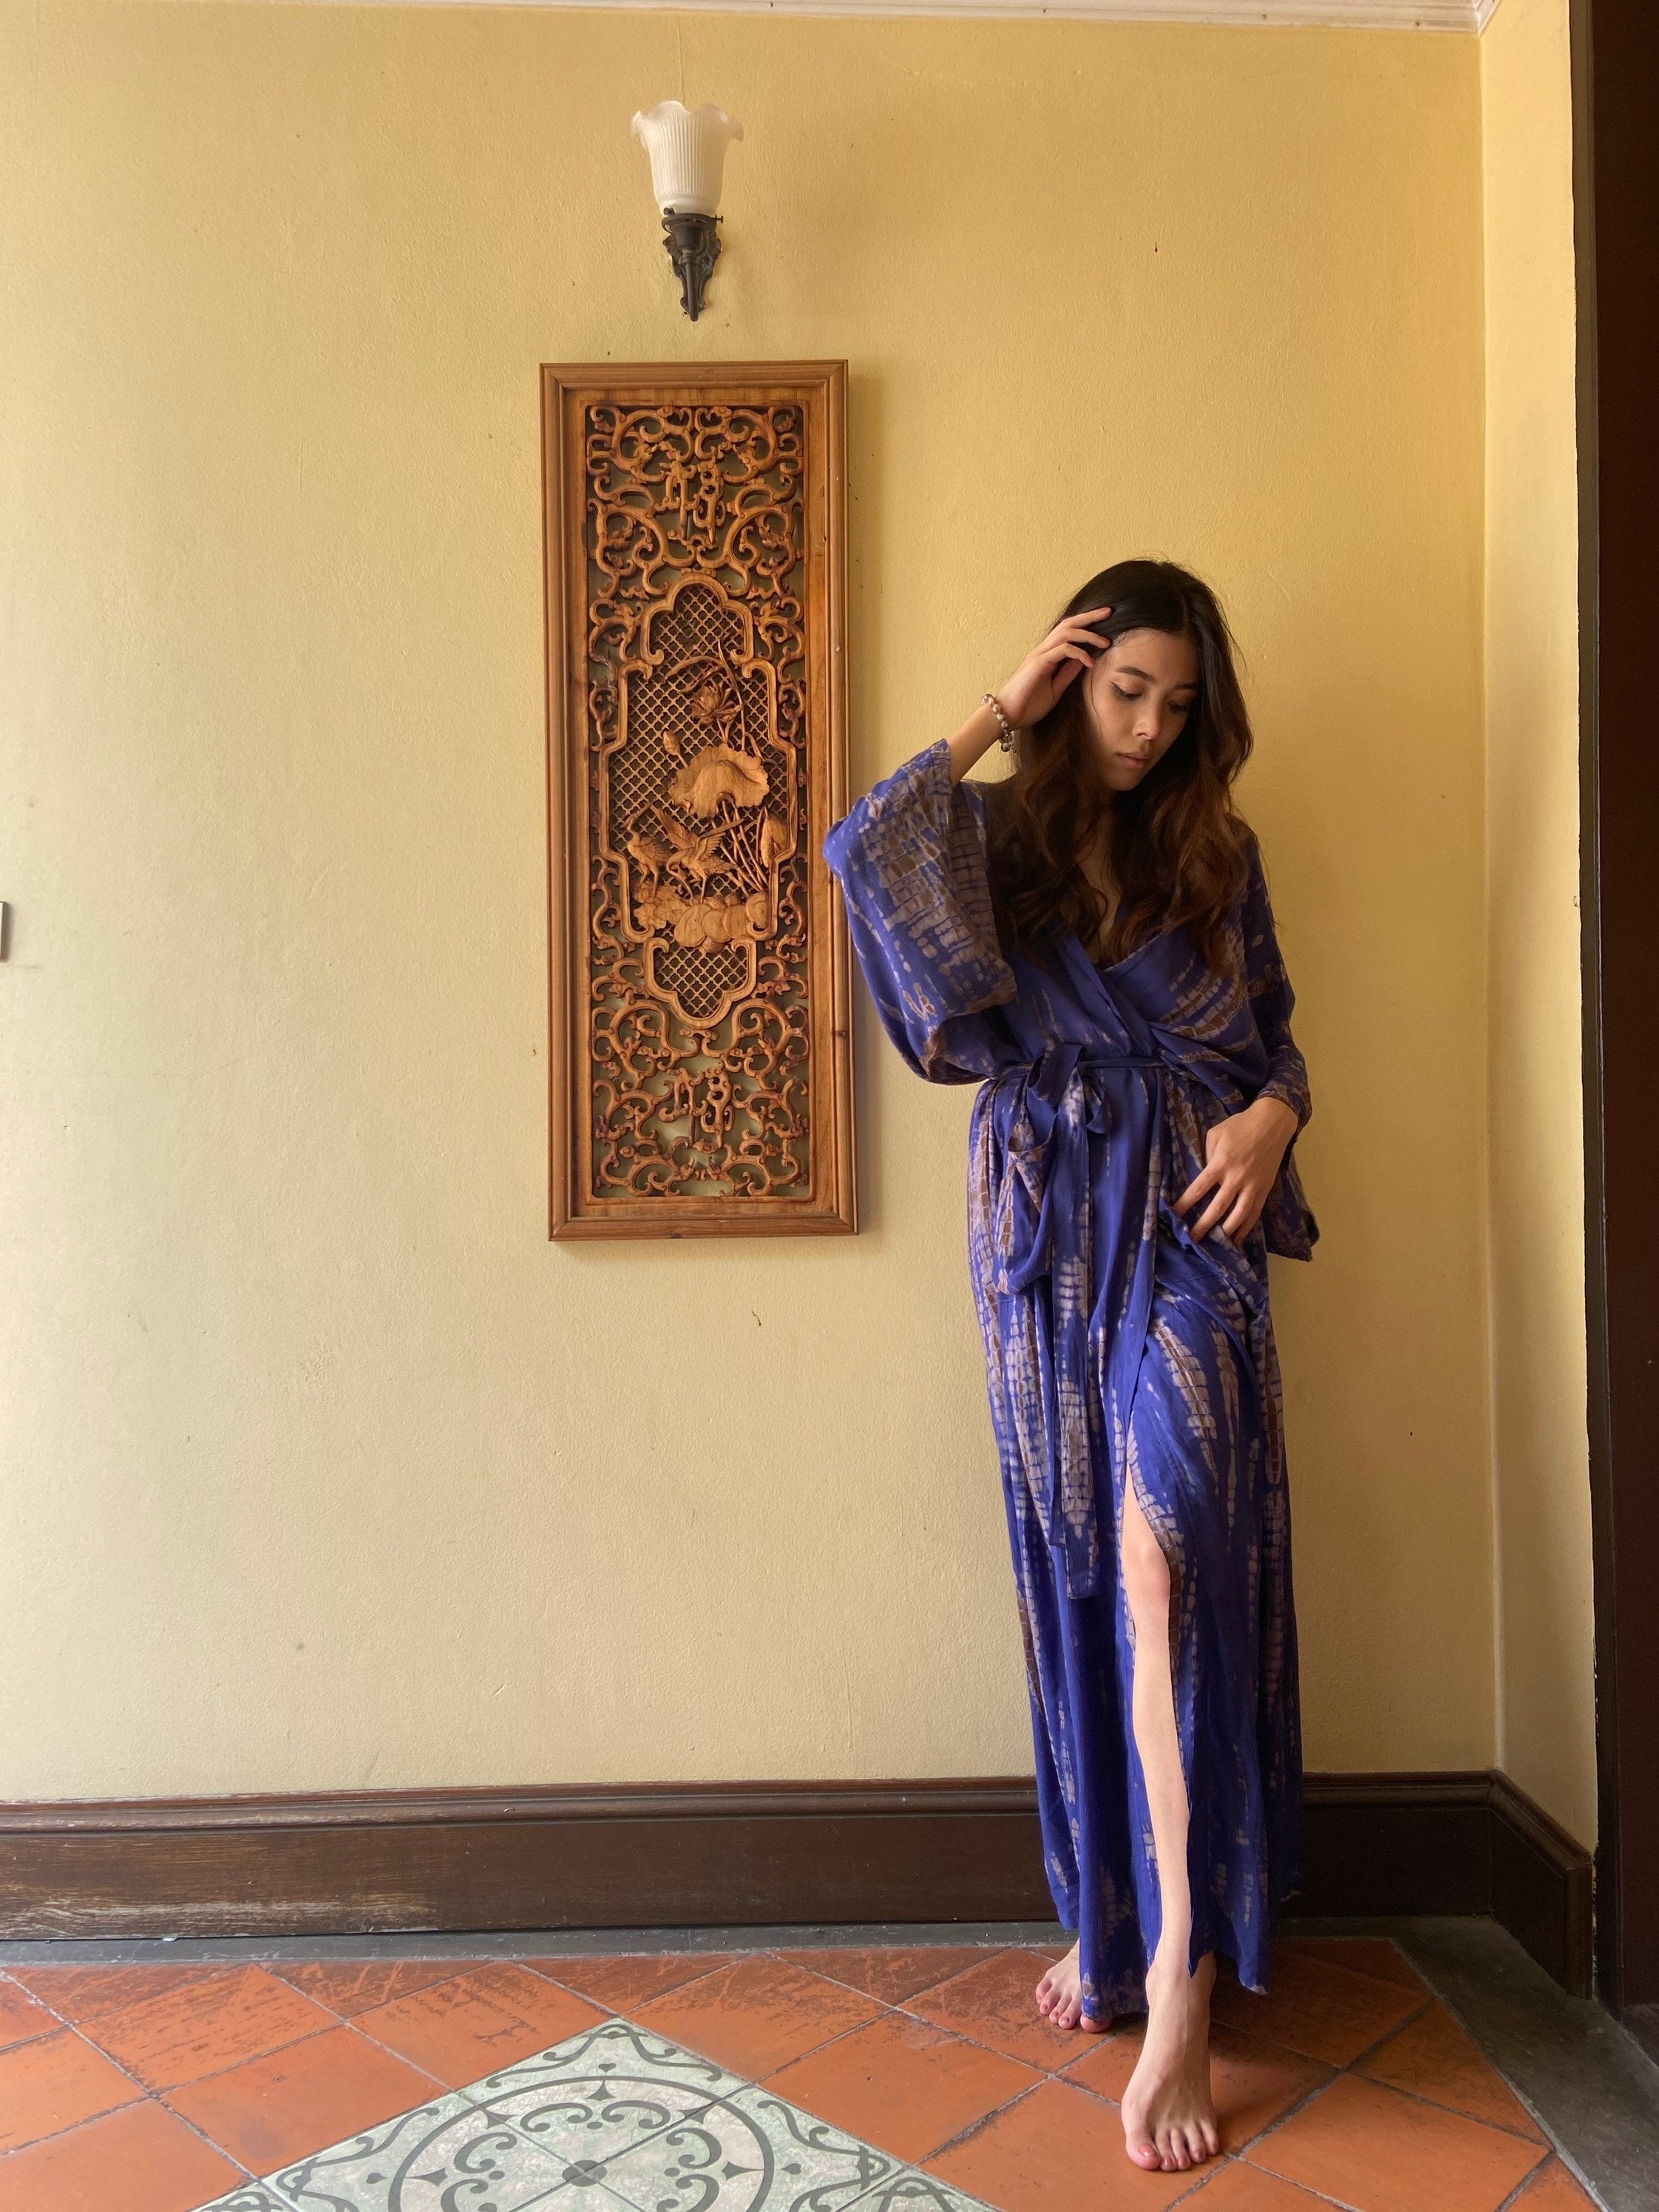 This unisex tie dye long kimono robe in purple, this Swan Tie dye kimono robe is the perfect piece for a boho look and ultimate comfort! Get yours now!